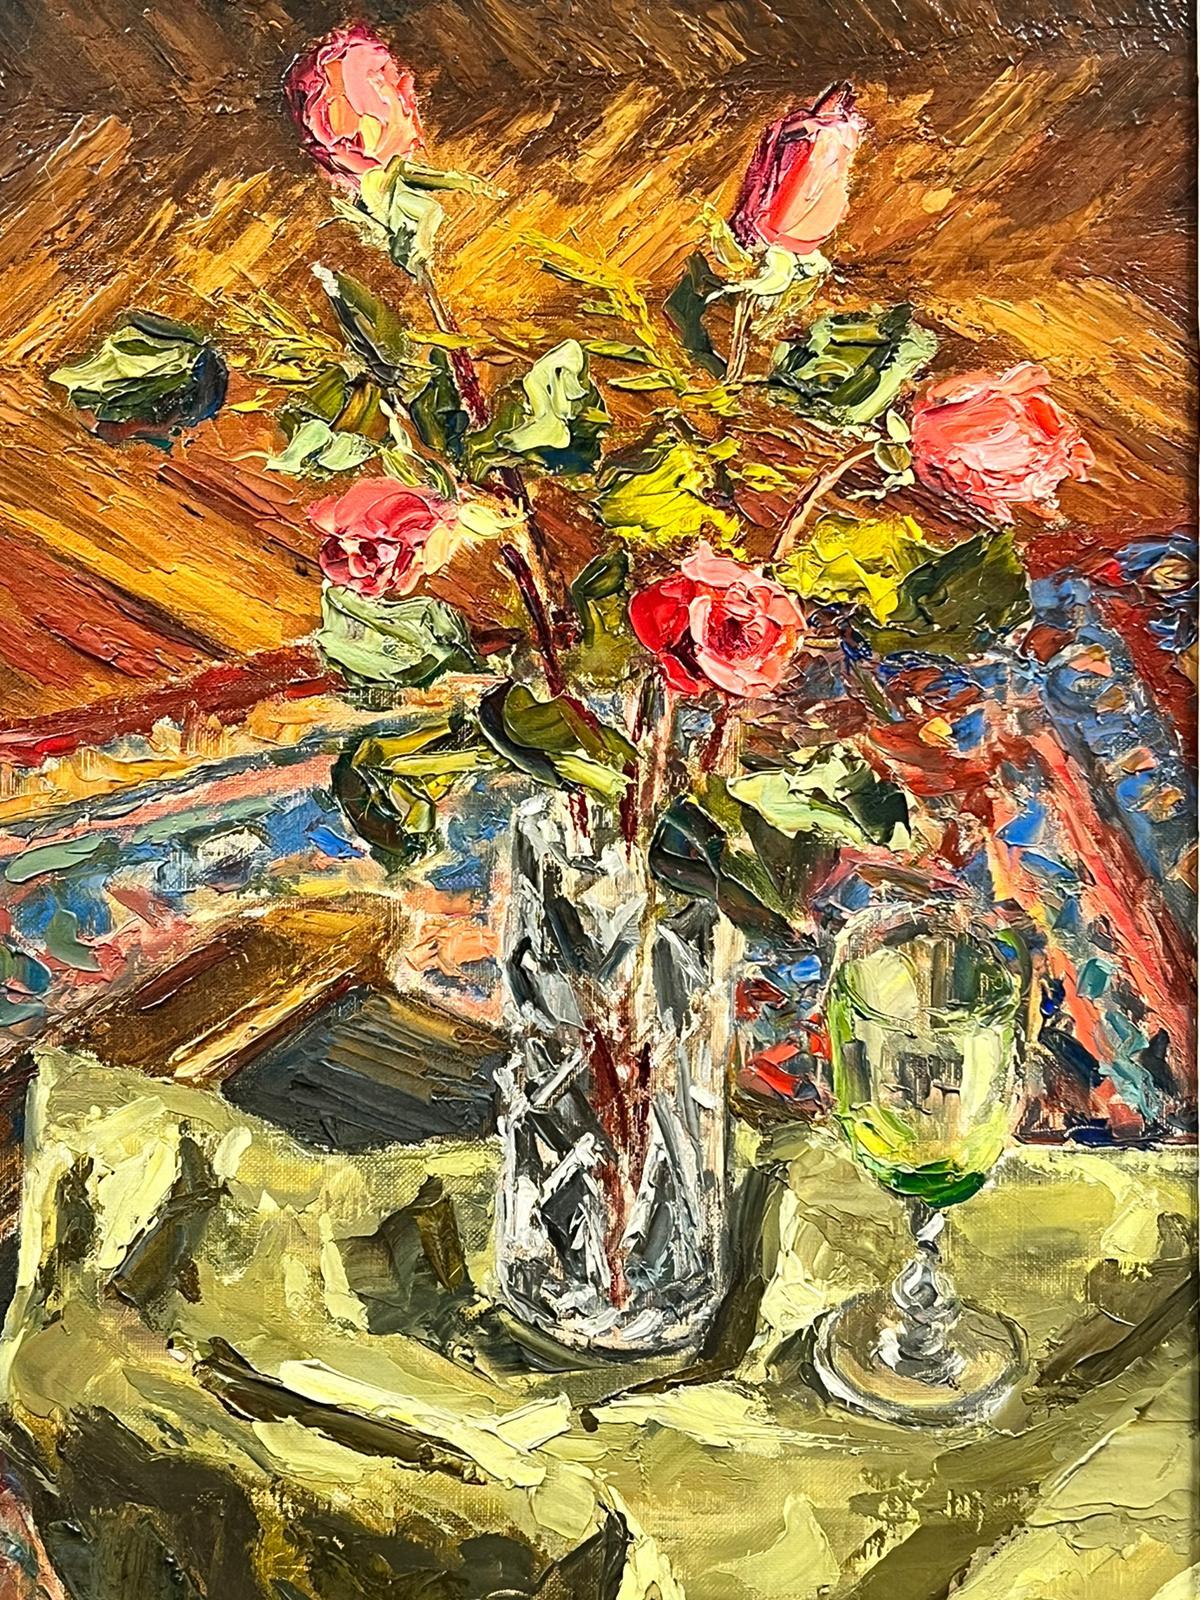 Roses in Vase
by Josine Vignon (French 1922-2022) 
signed oil painting on canvas, framed
framed: 29 x 20 inches
canvas: 22 x 13 inches
very good condition 
provenance: from the artists estate, France

Josine Vignon (1922-2022) was a French artist